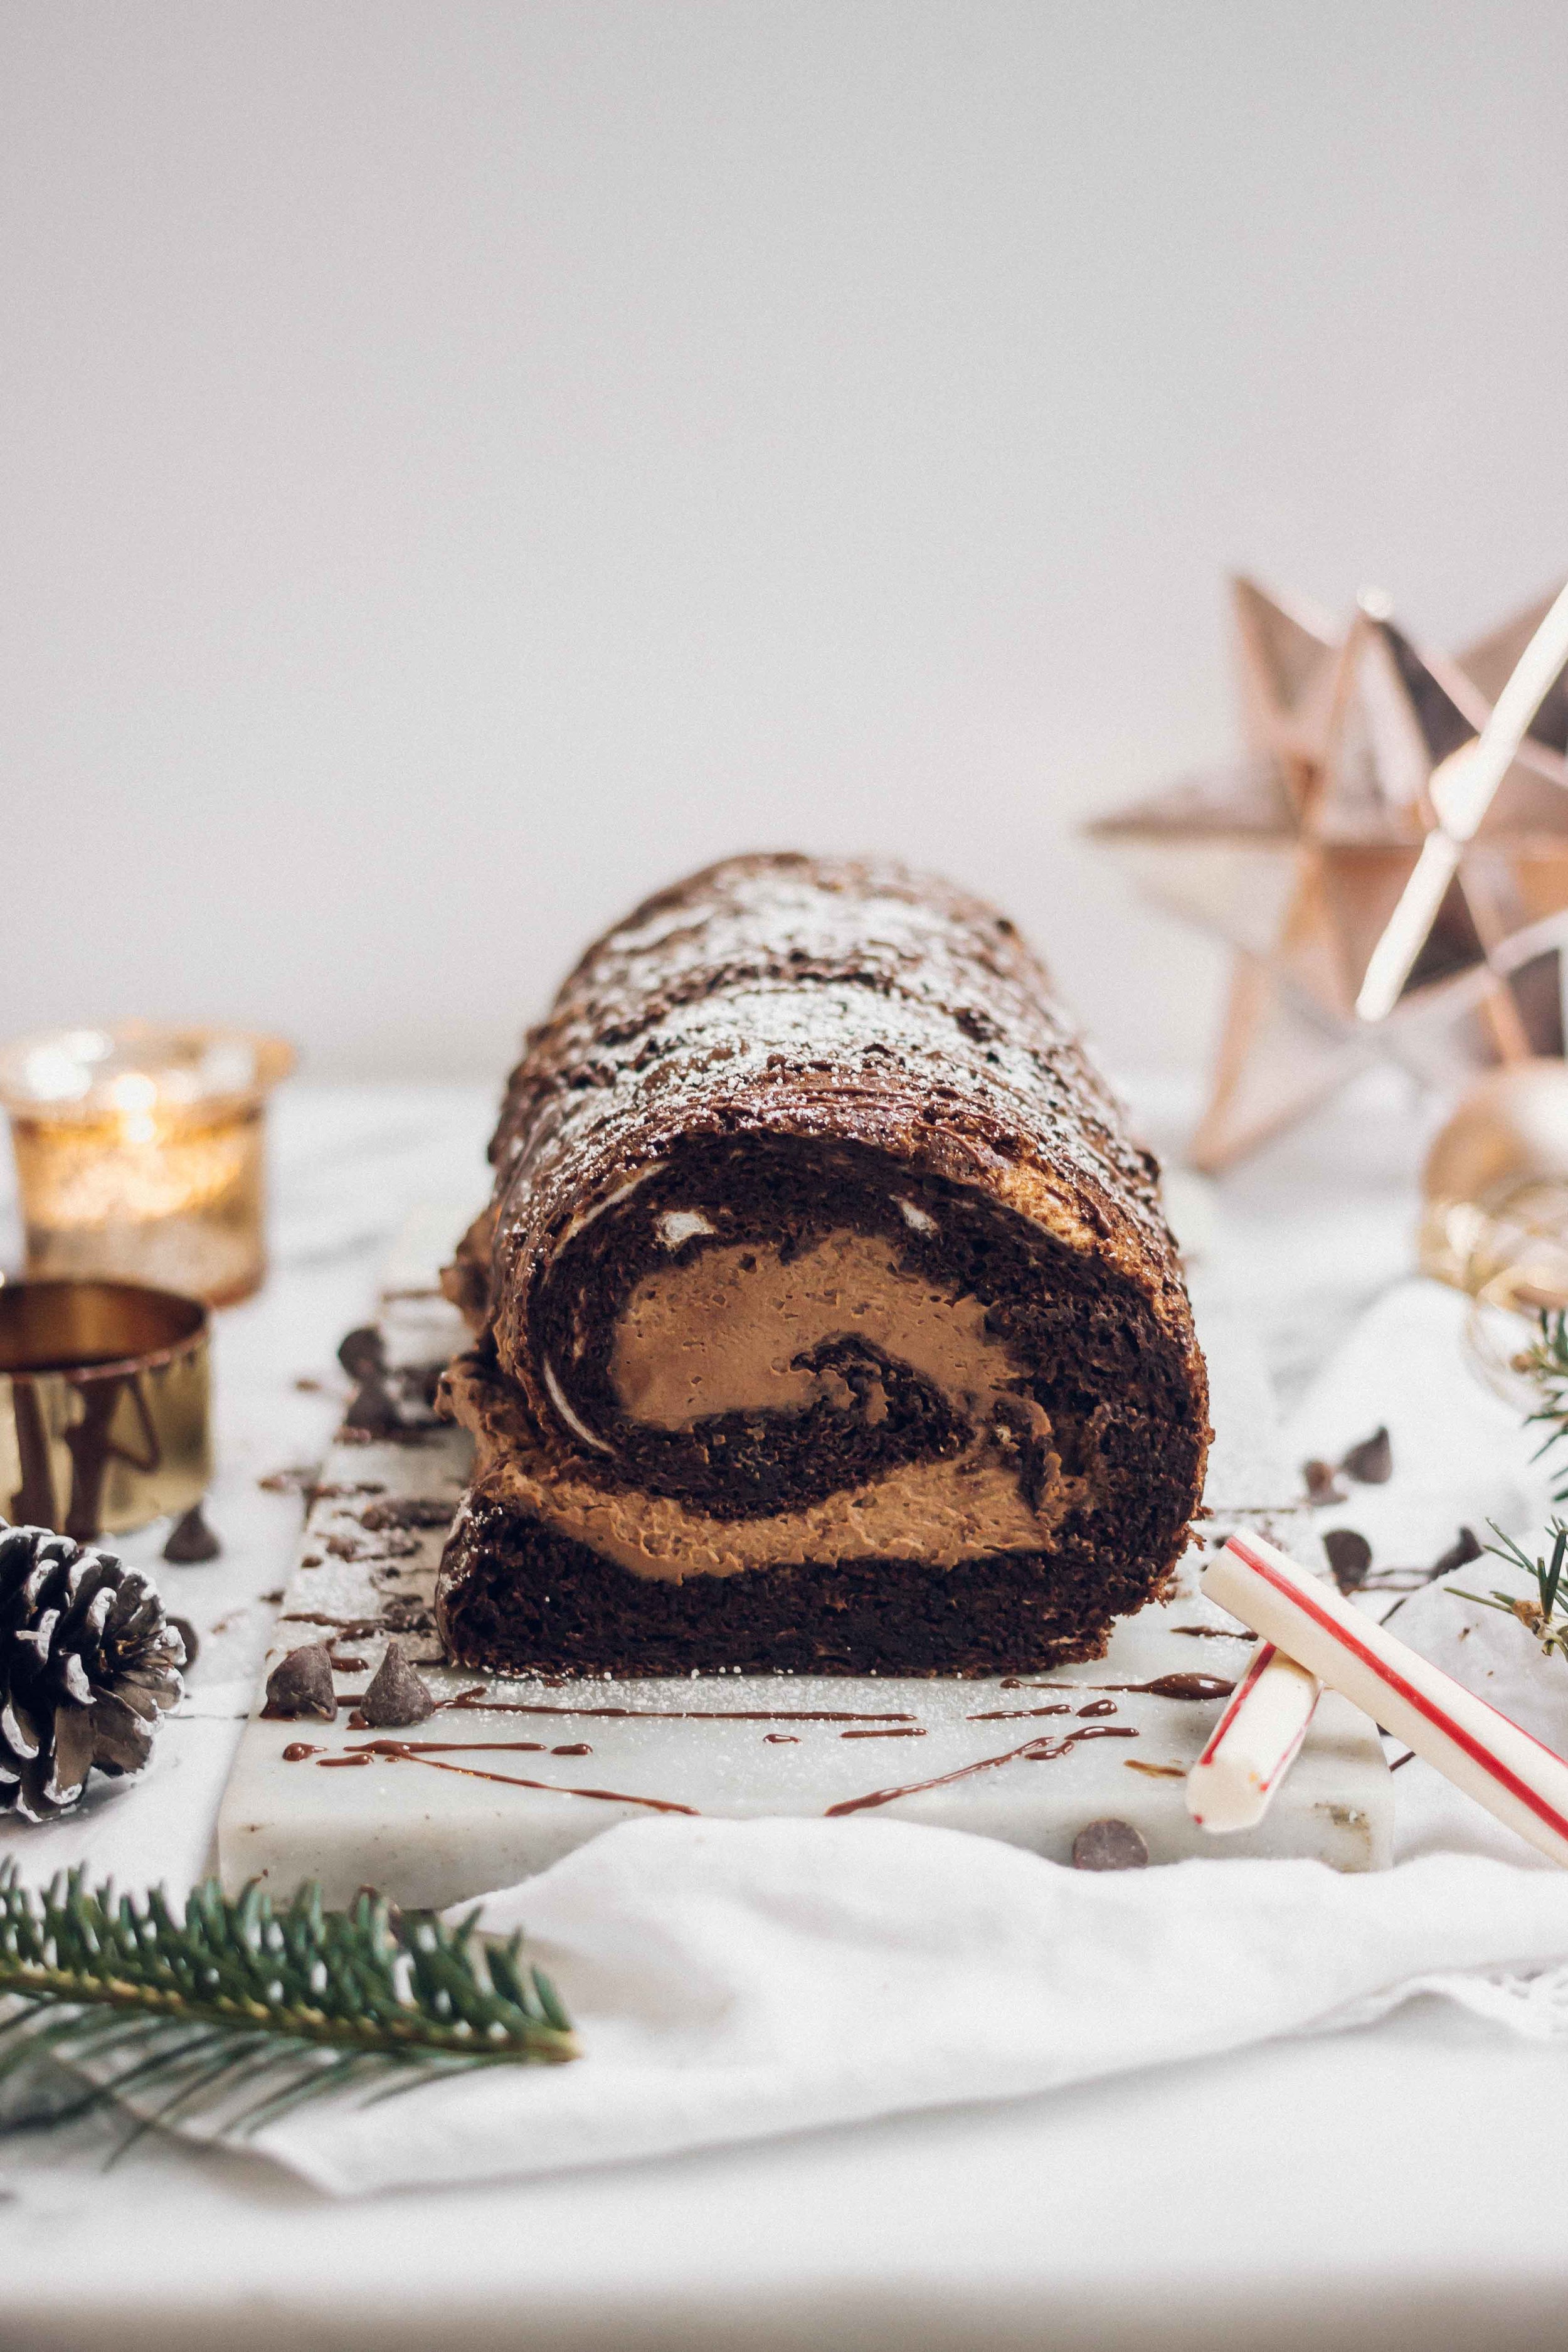 French Gluten Free Bûche De Nöel Christmas Recipe - The Well Essentials - A decadent and simple twist on a traditional french buche de noel, this cake is rich with chocolate flavor and whipped cream